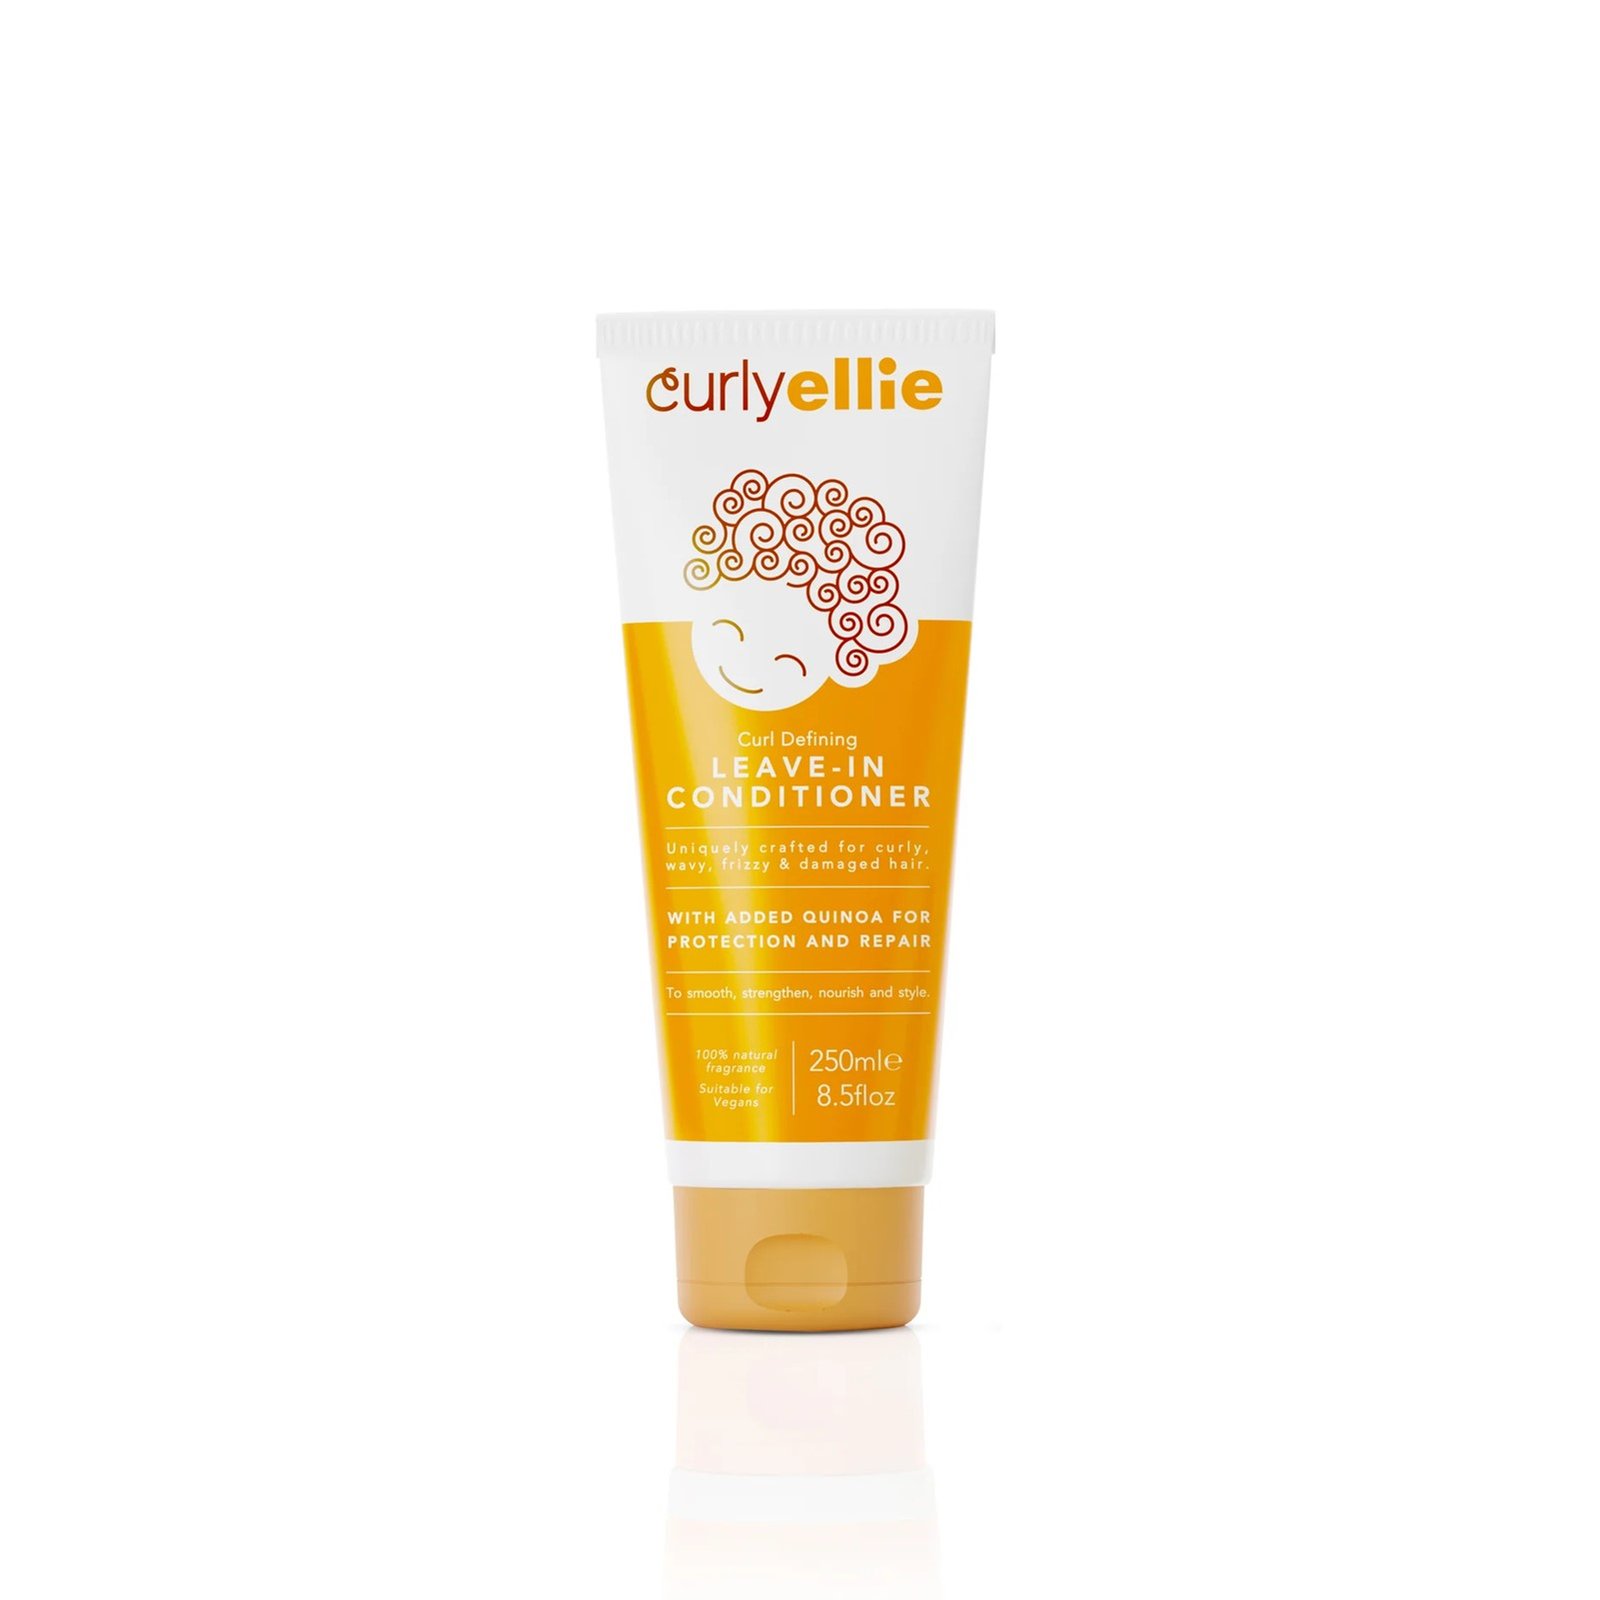 CurlyEllie Curl Defining Leave-in Conditioner 250ml